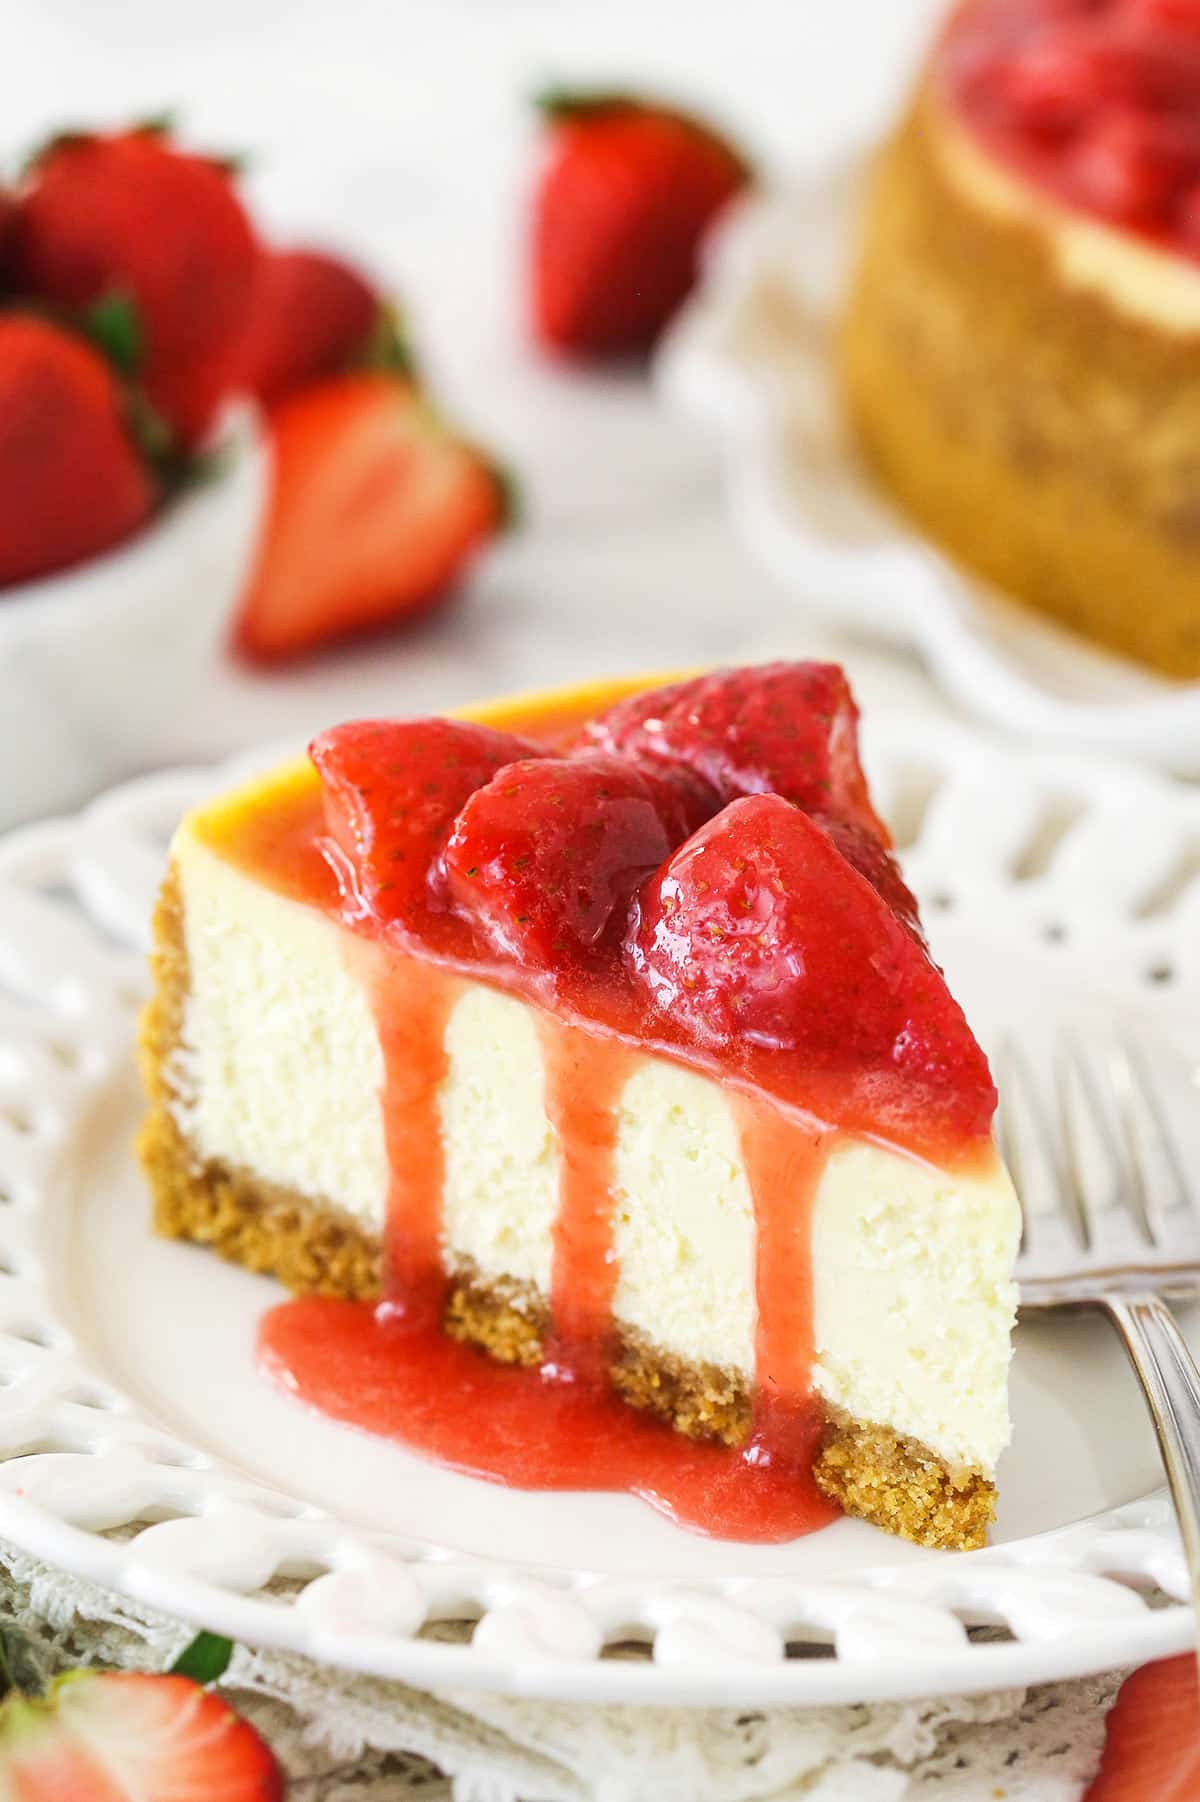 As slice of ultimate strawberry cheesecake on a plate near a bowl of fresh strawberries and a full strawberry cheesecake.